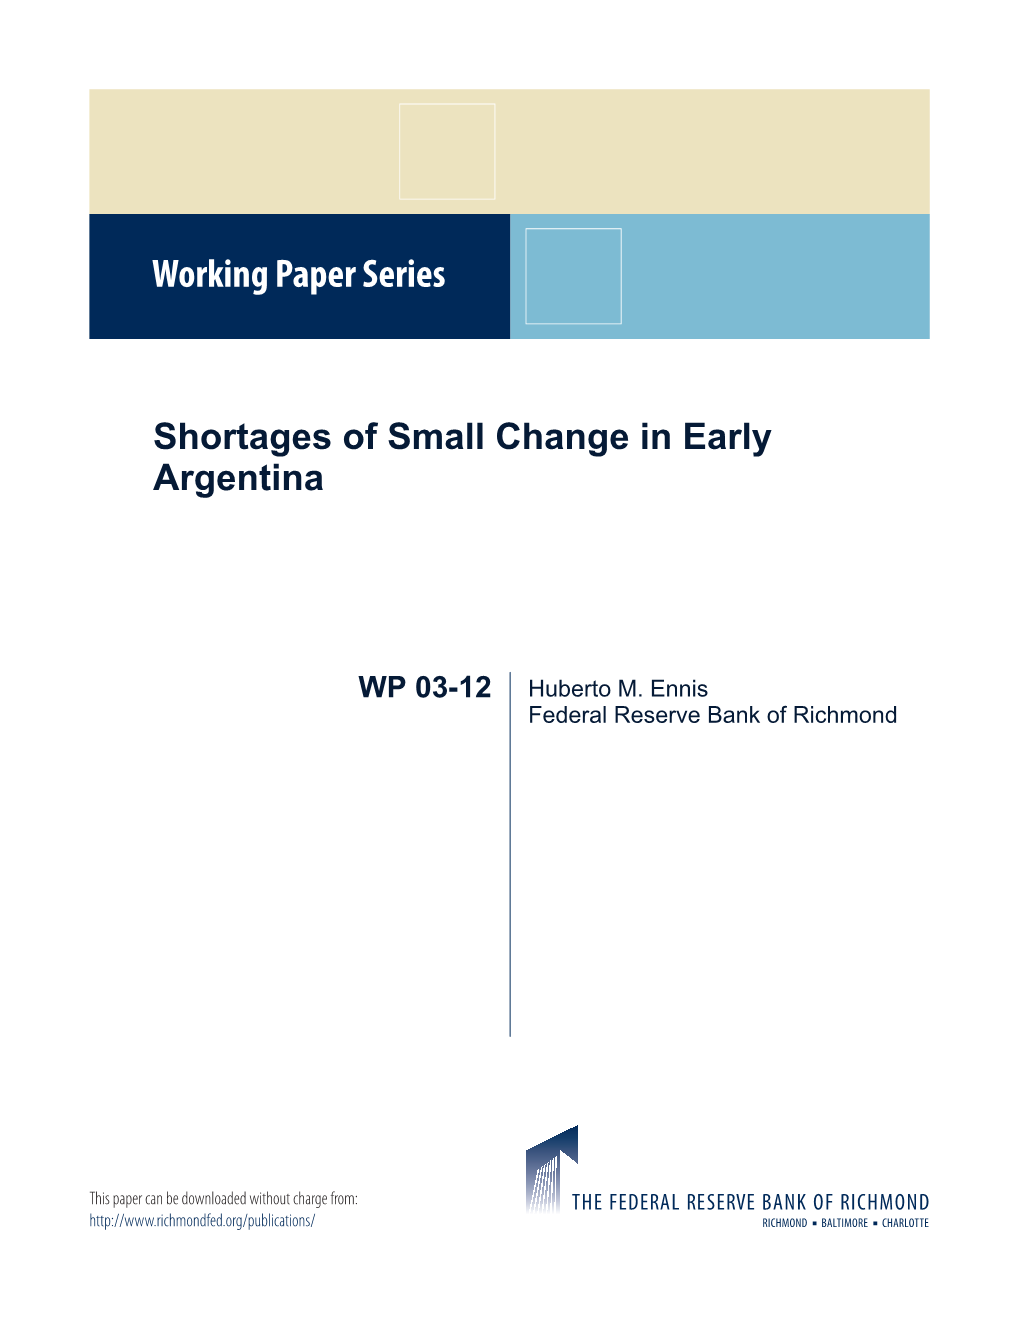 Shortages of Small Change in Early Argentina *